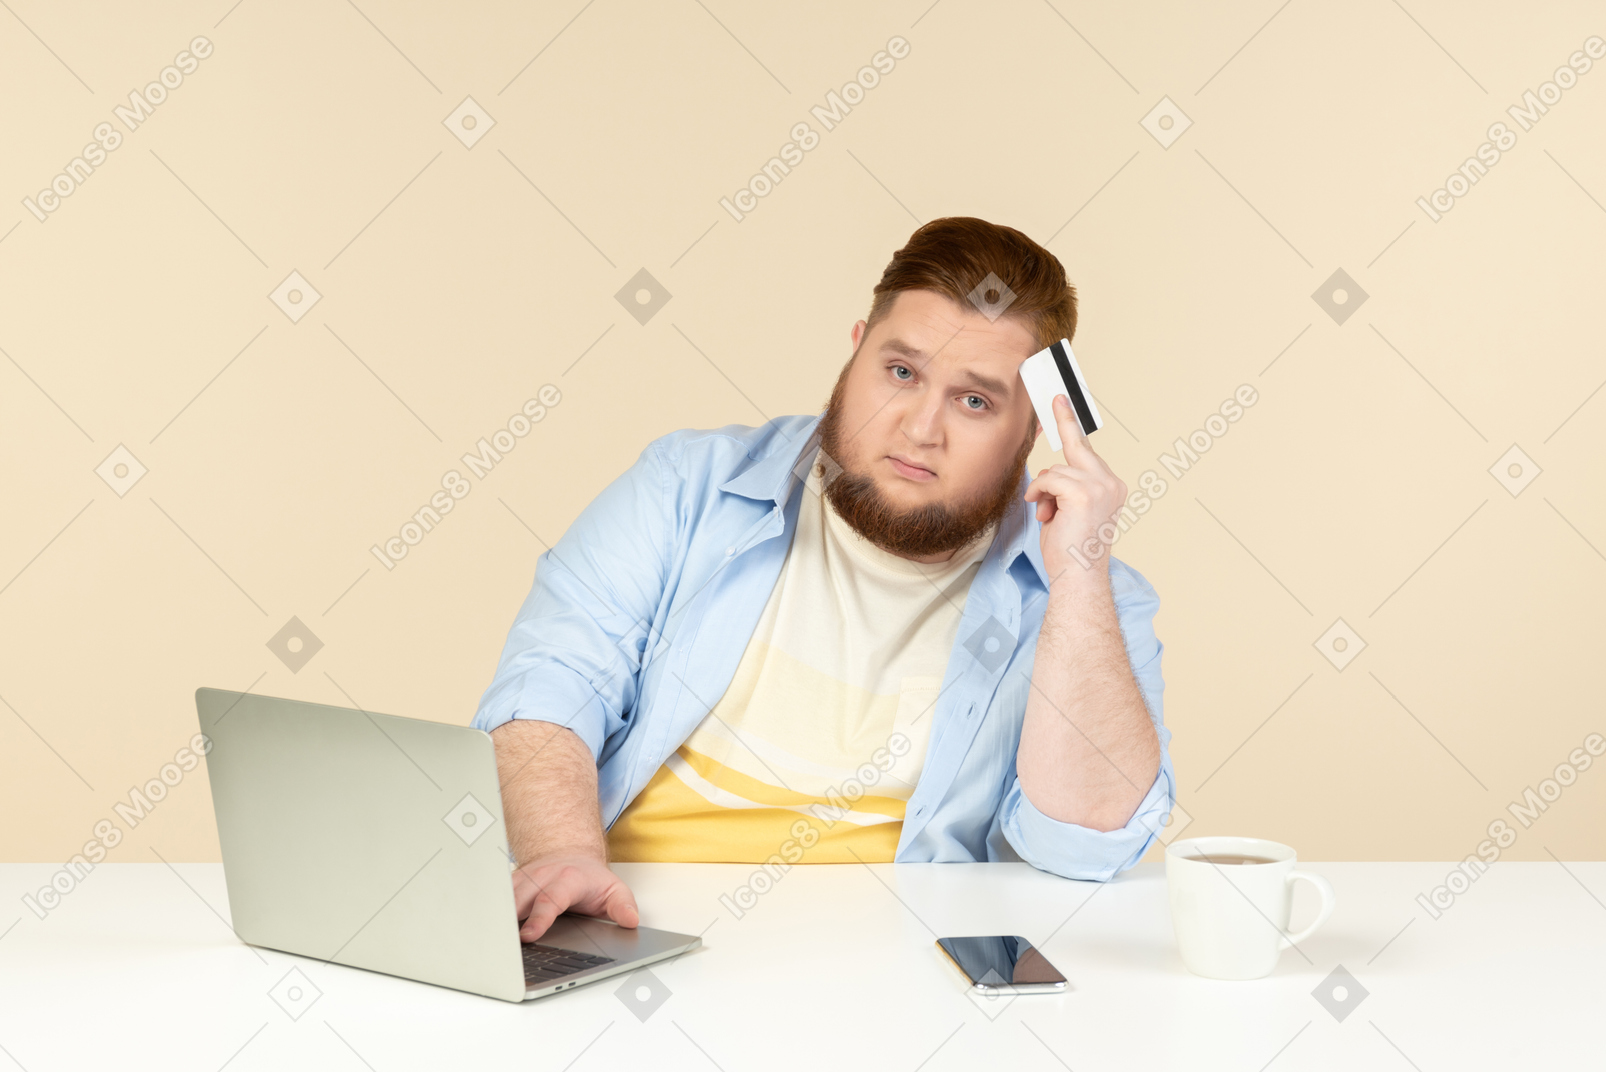 Pensive young overweight man sitting in front of laptop and doing online shopping